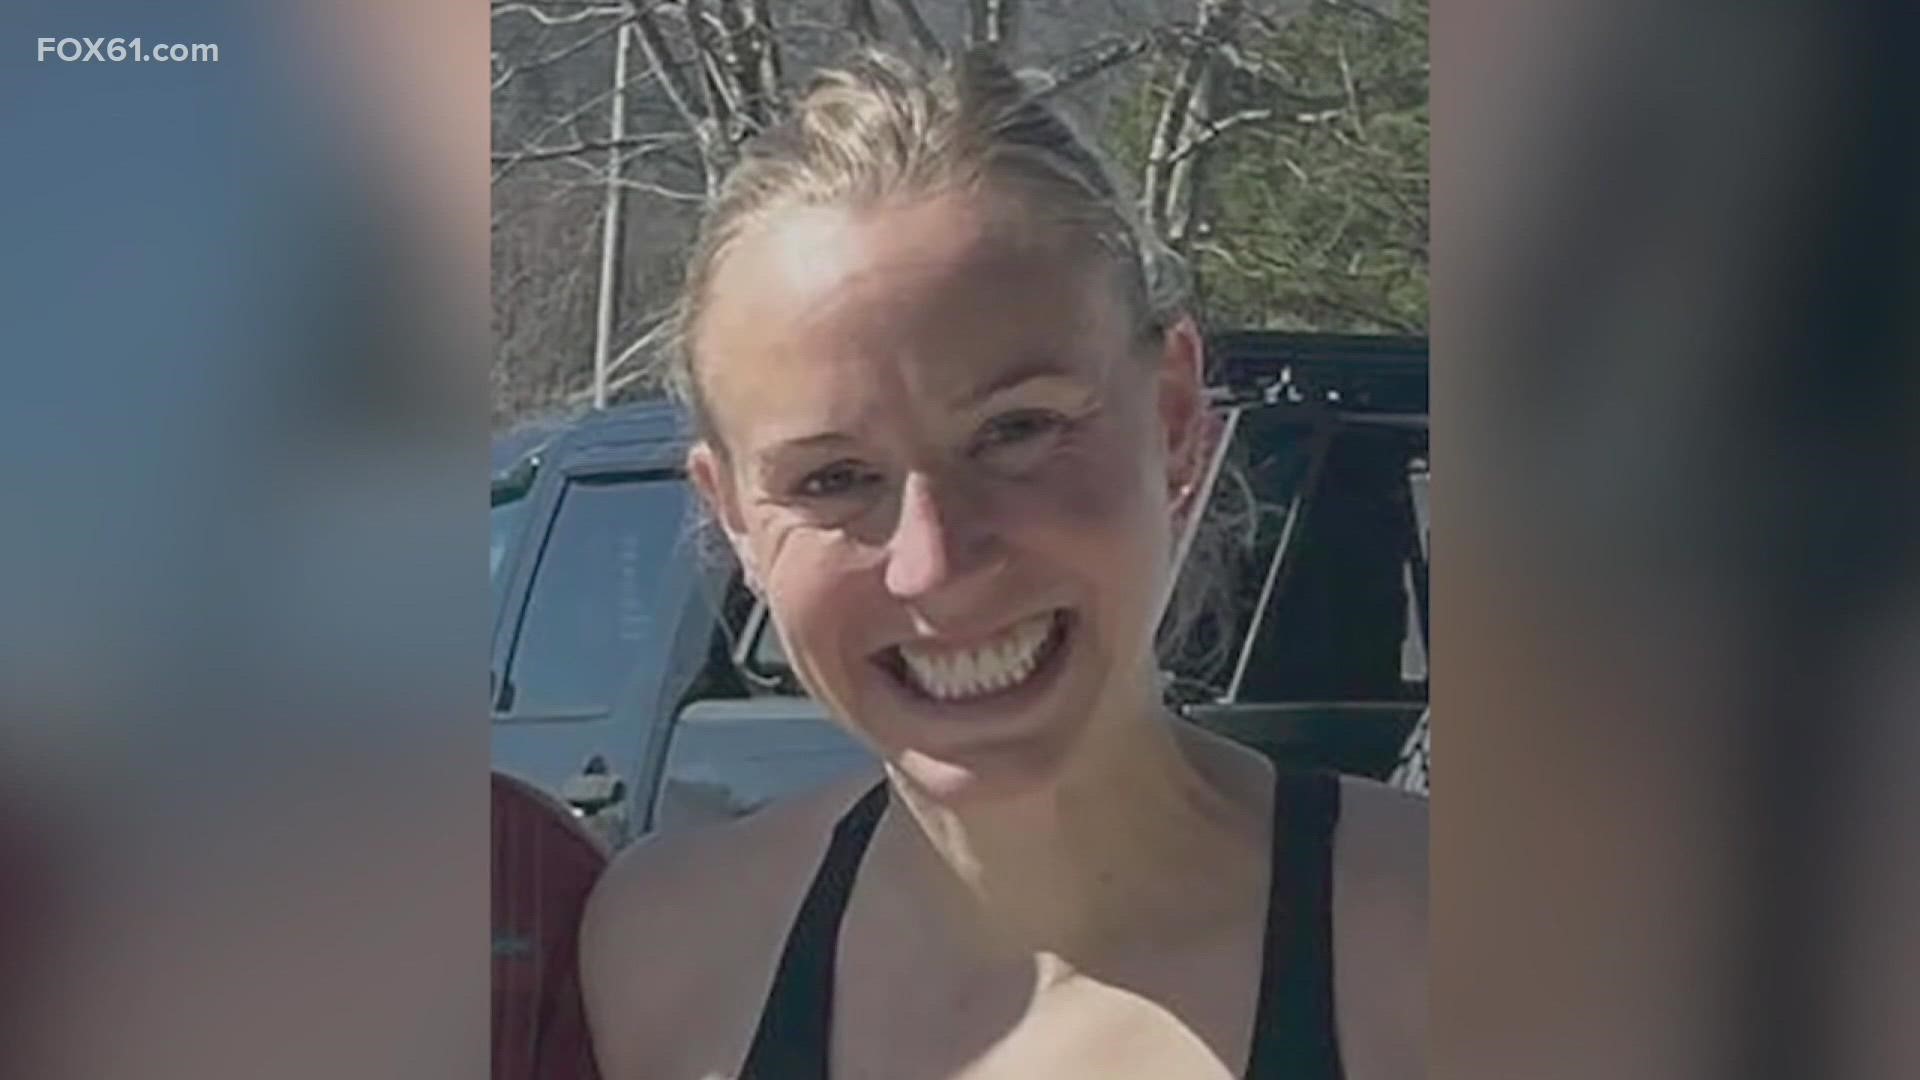 34-year-old Eliza Fletcher was kidnapped and murdered while on an early morning run in Memphis, Tennessee.